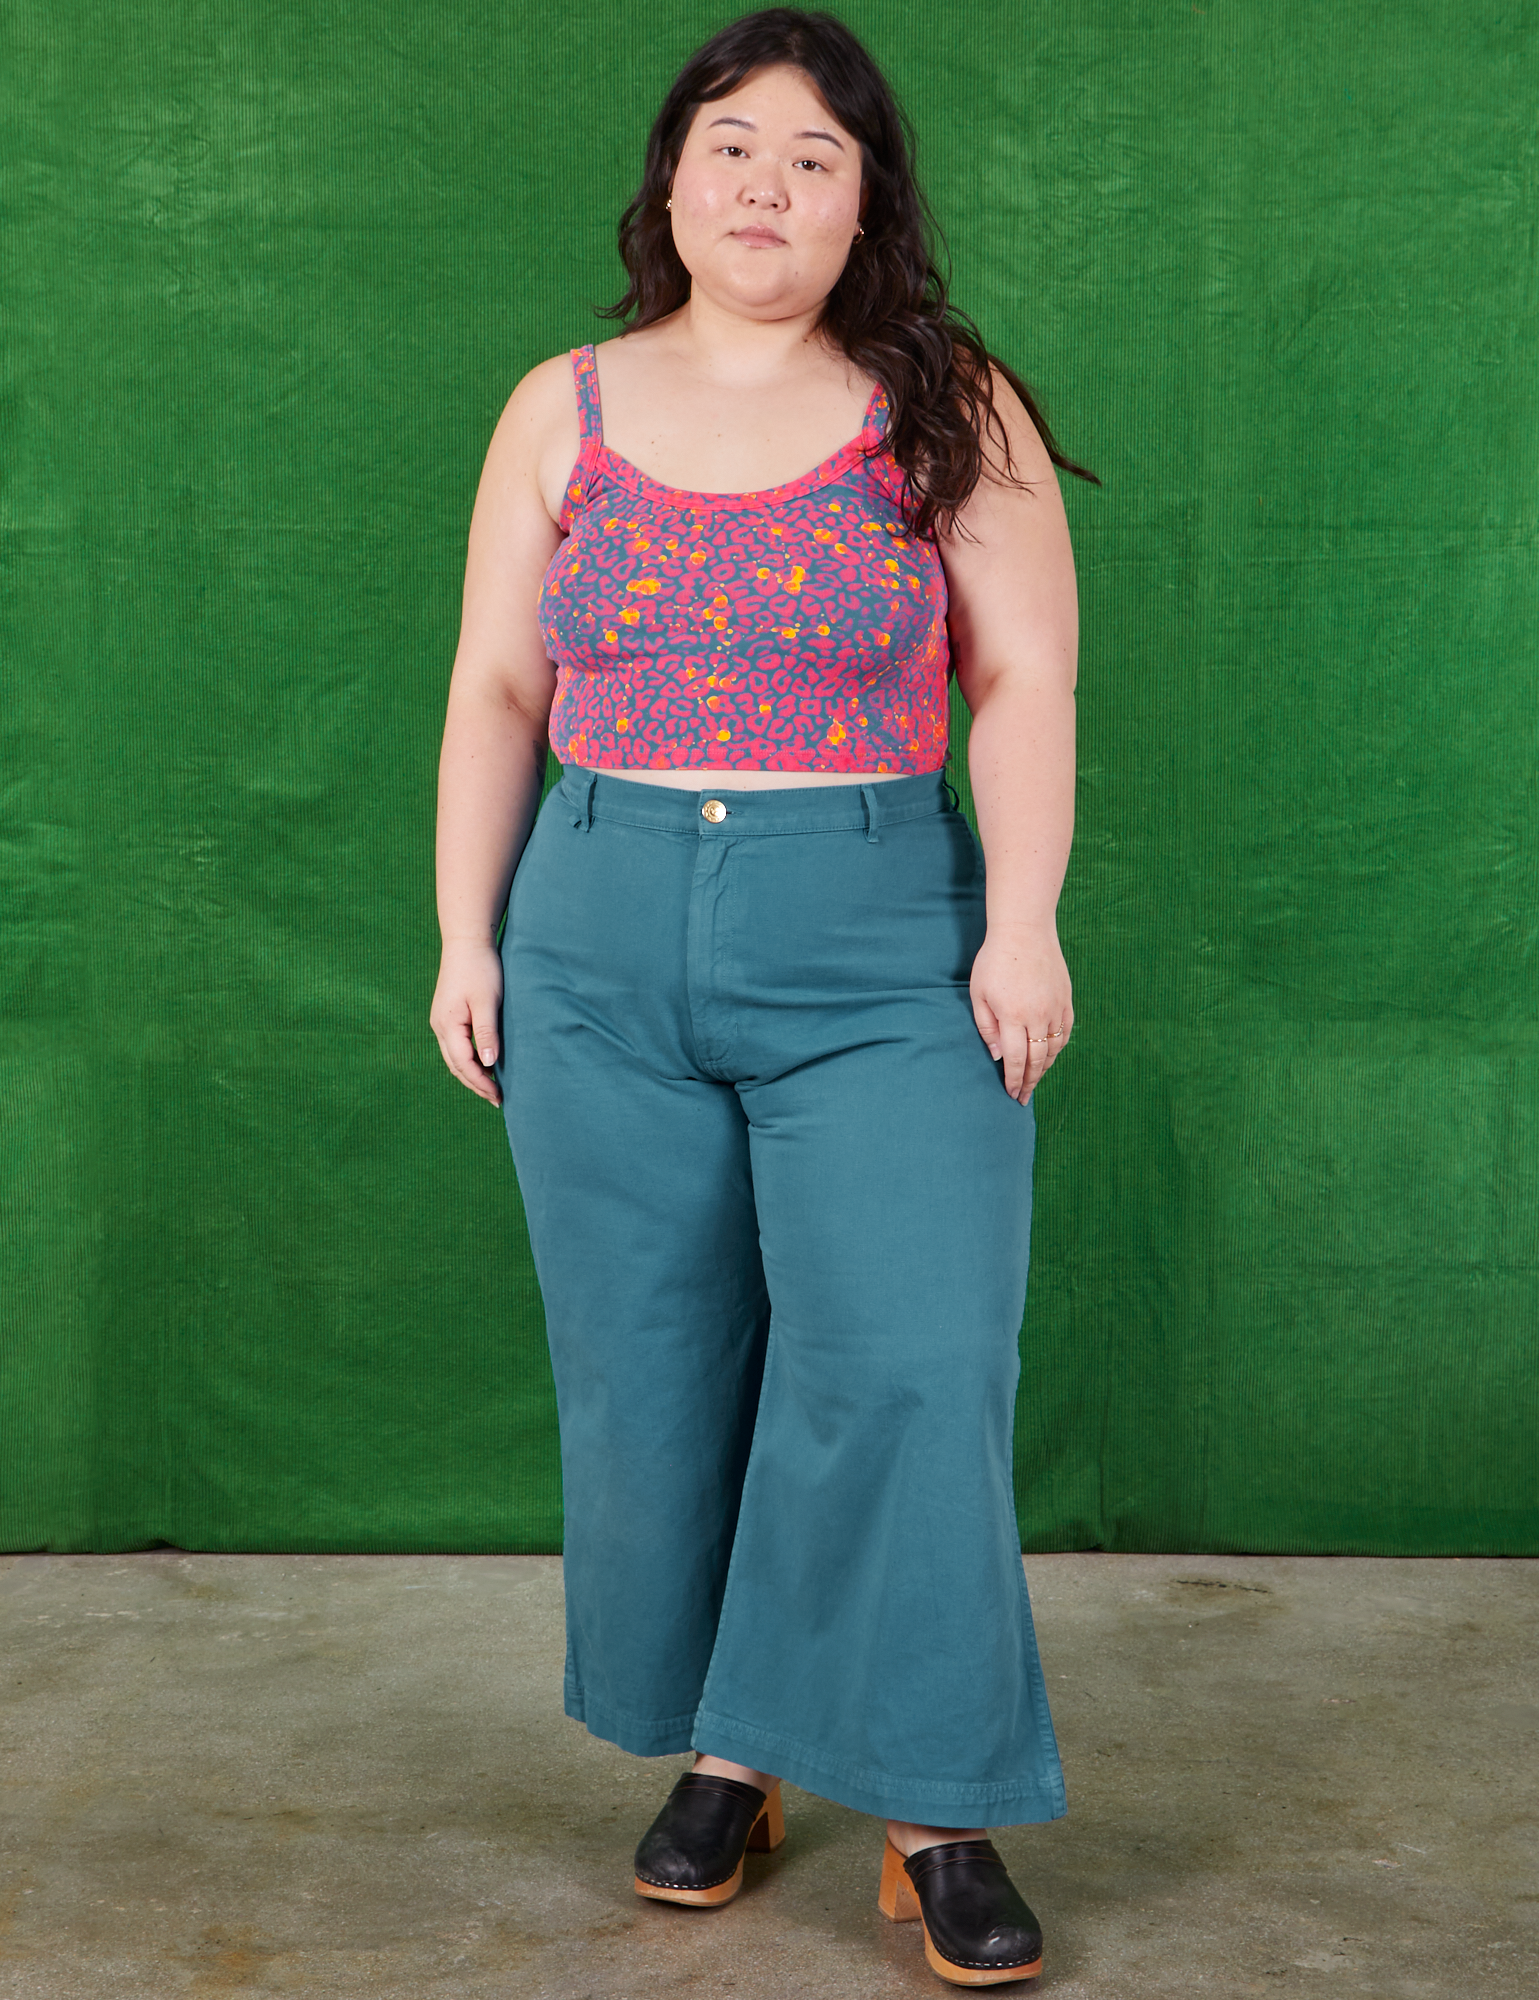 Ashley is wearing Cami in Electric Leopard and marine blue Bell Bottoms